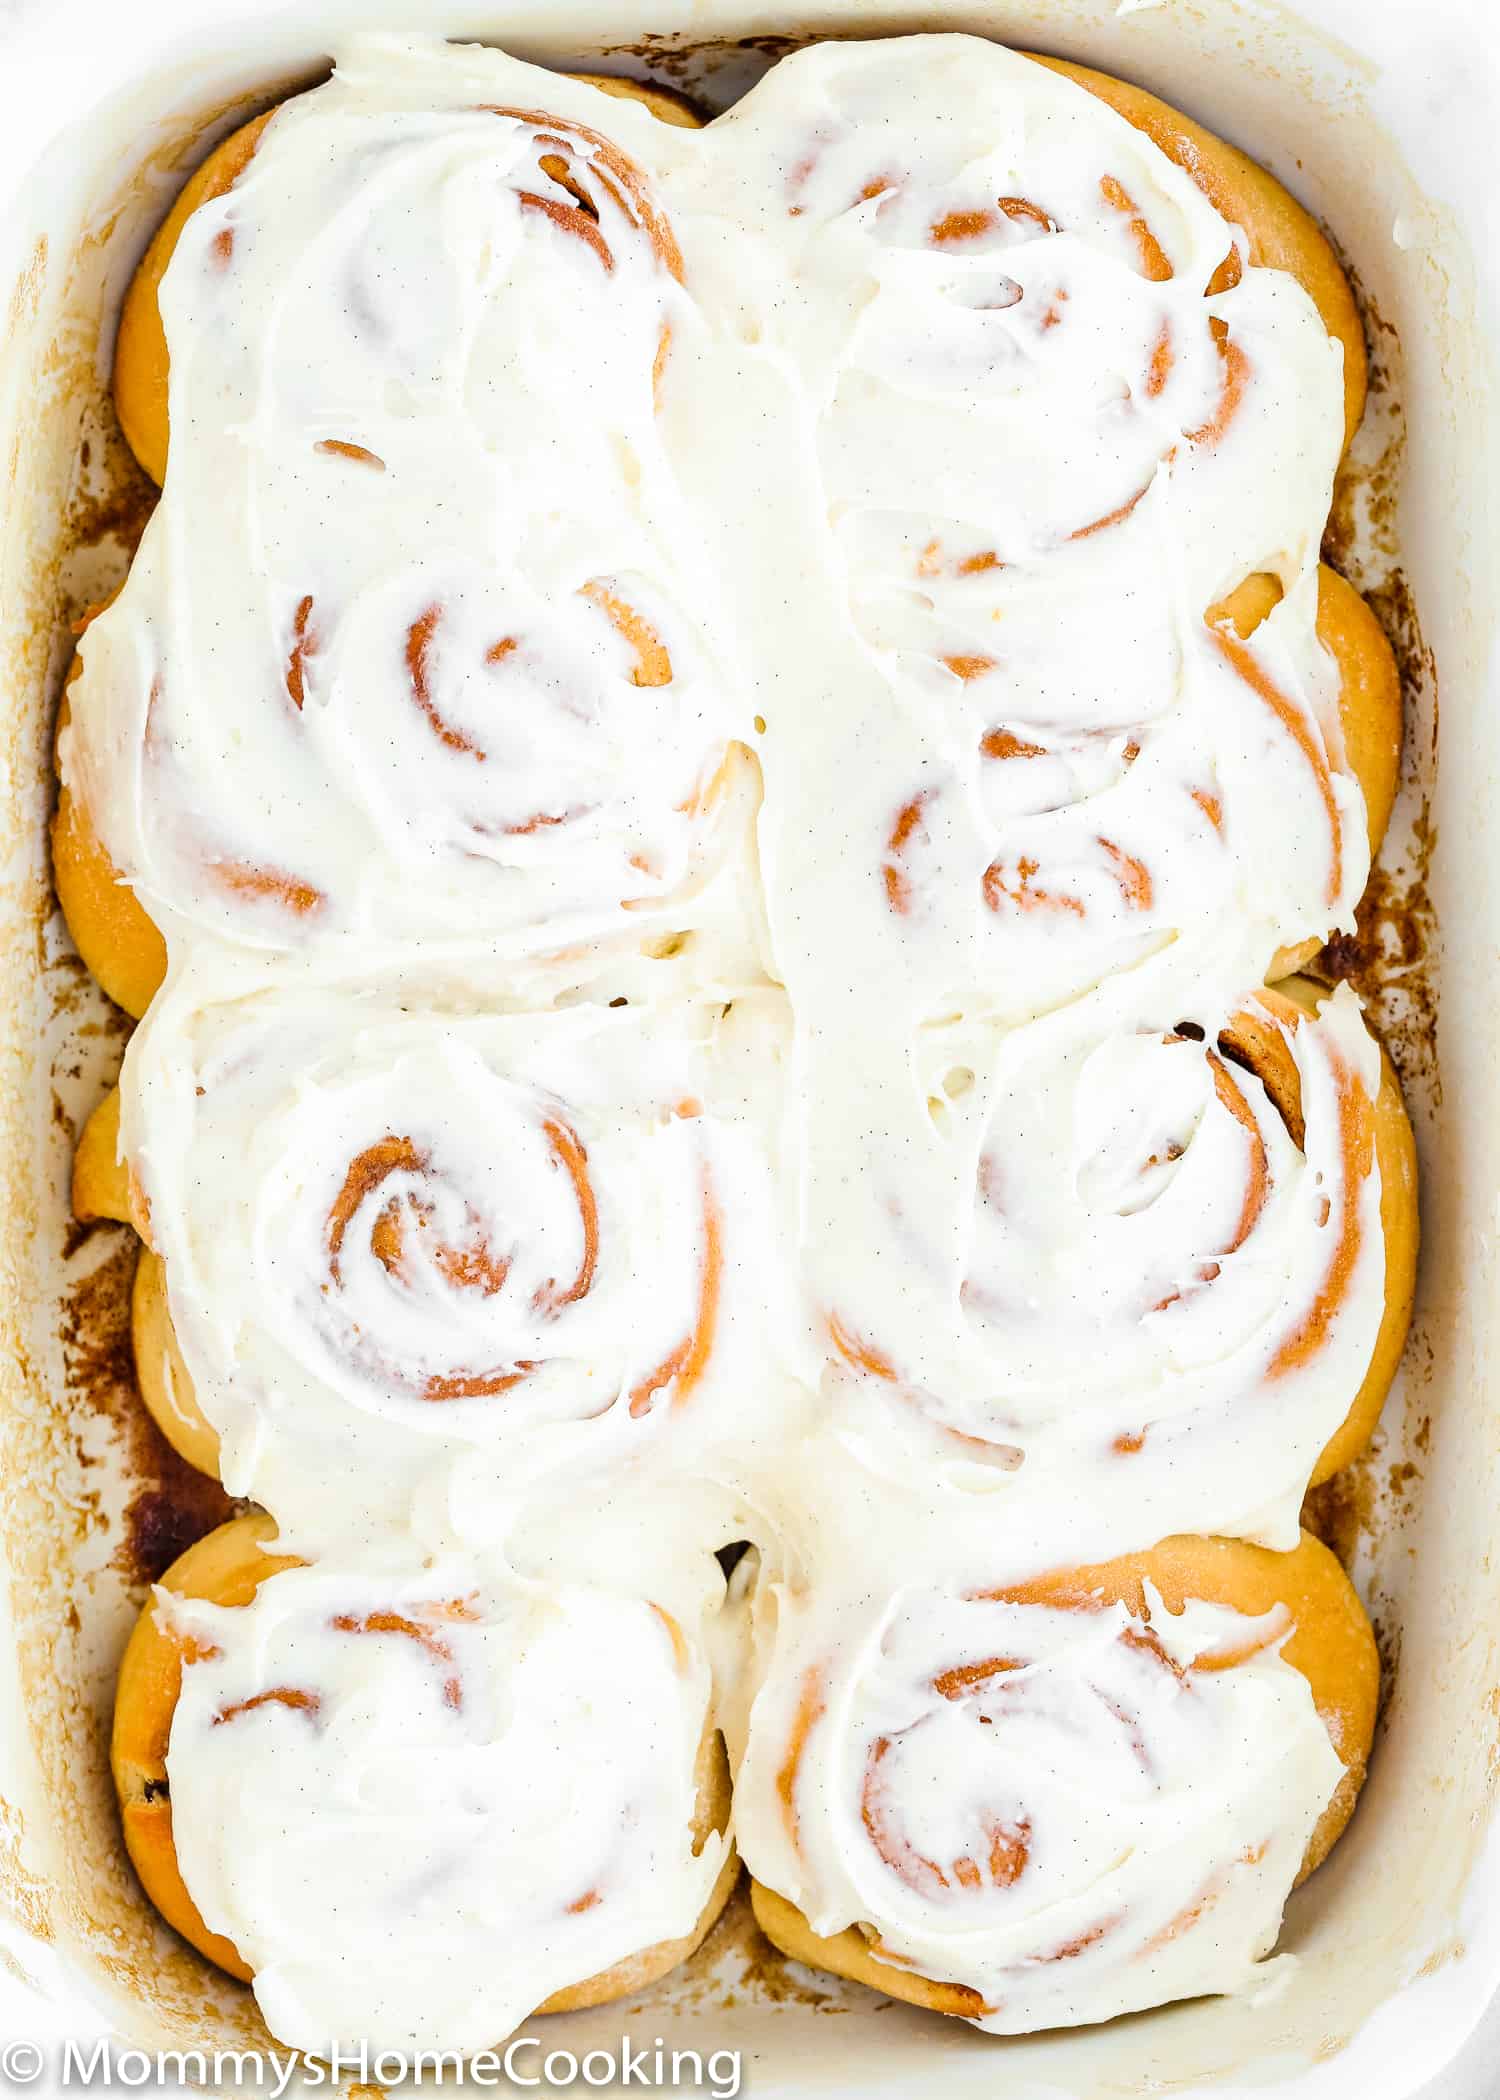 Egg-free cinnamon rolls in a baking pan with frosting on top.